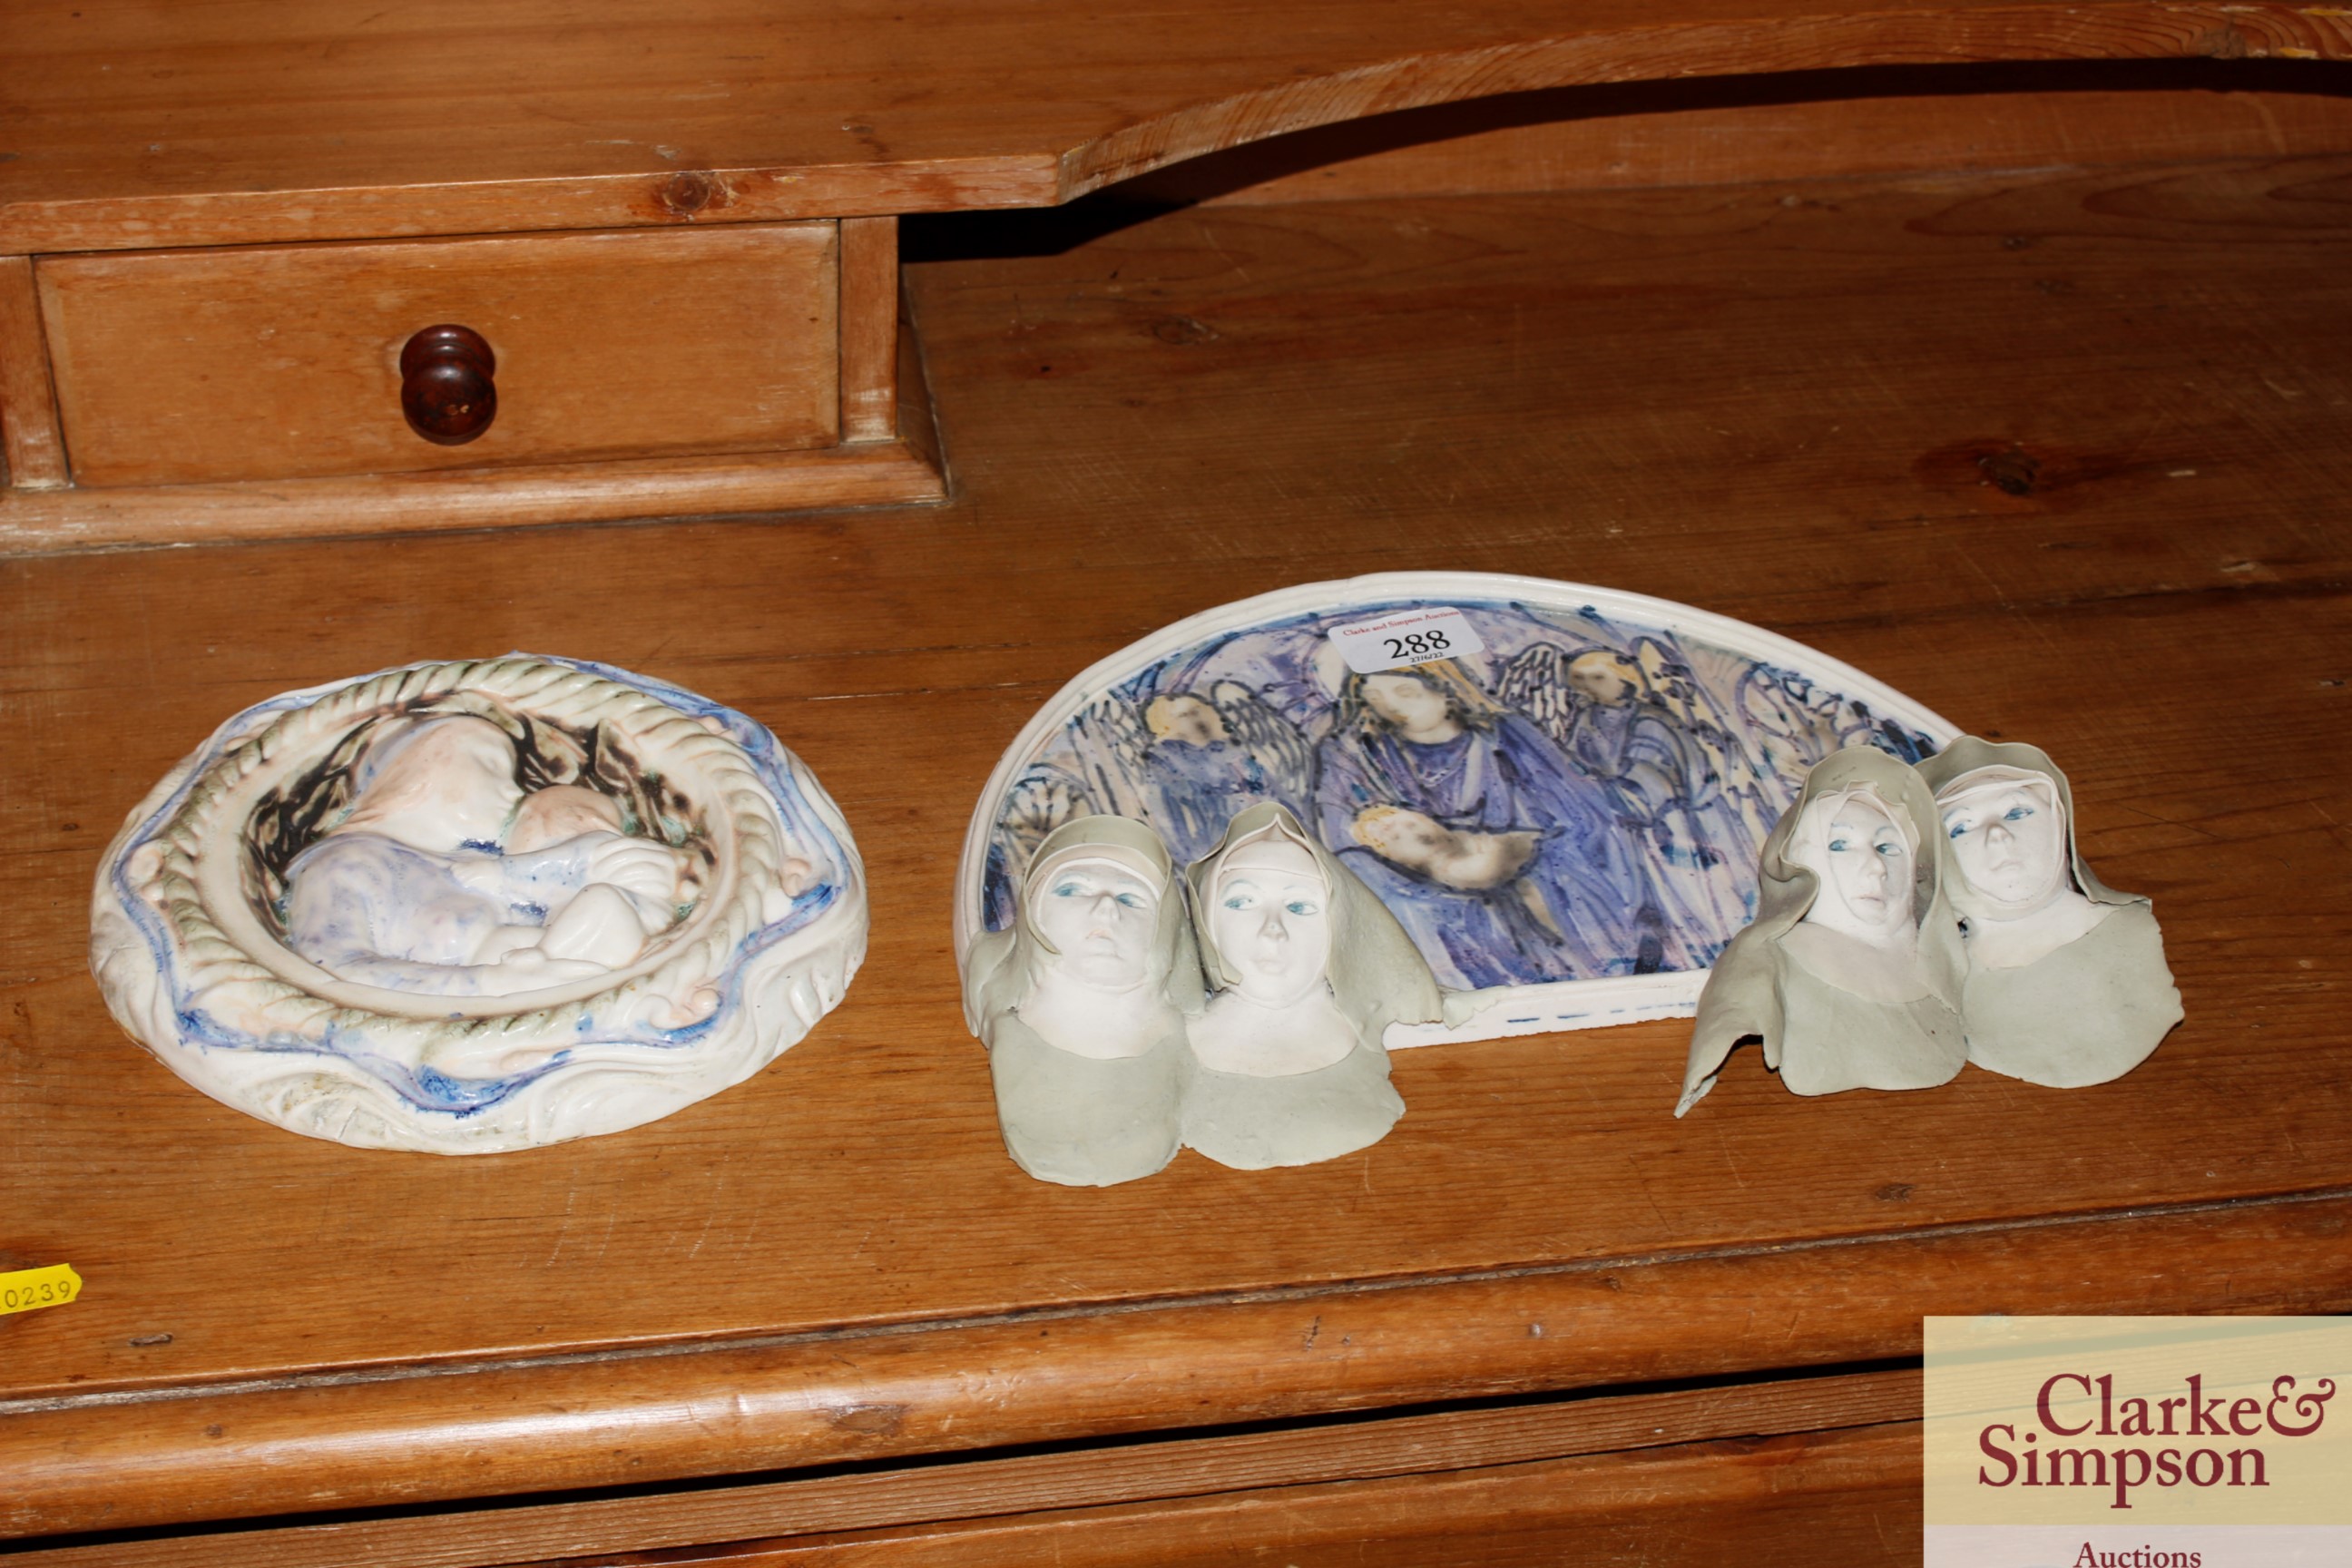 Two Gillian Still pottery plaques